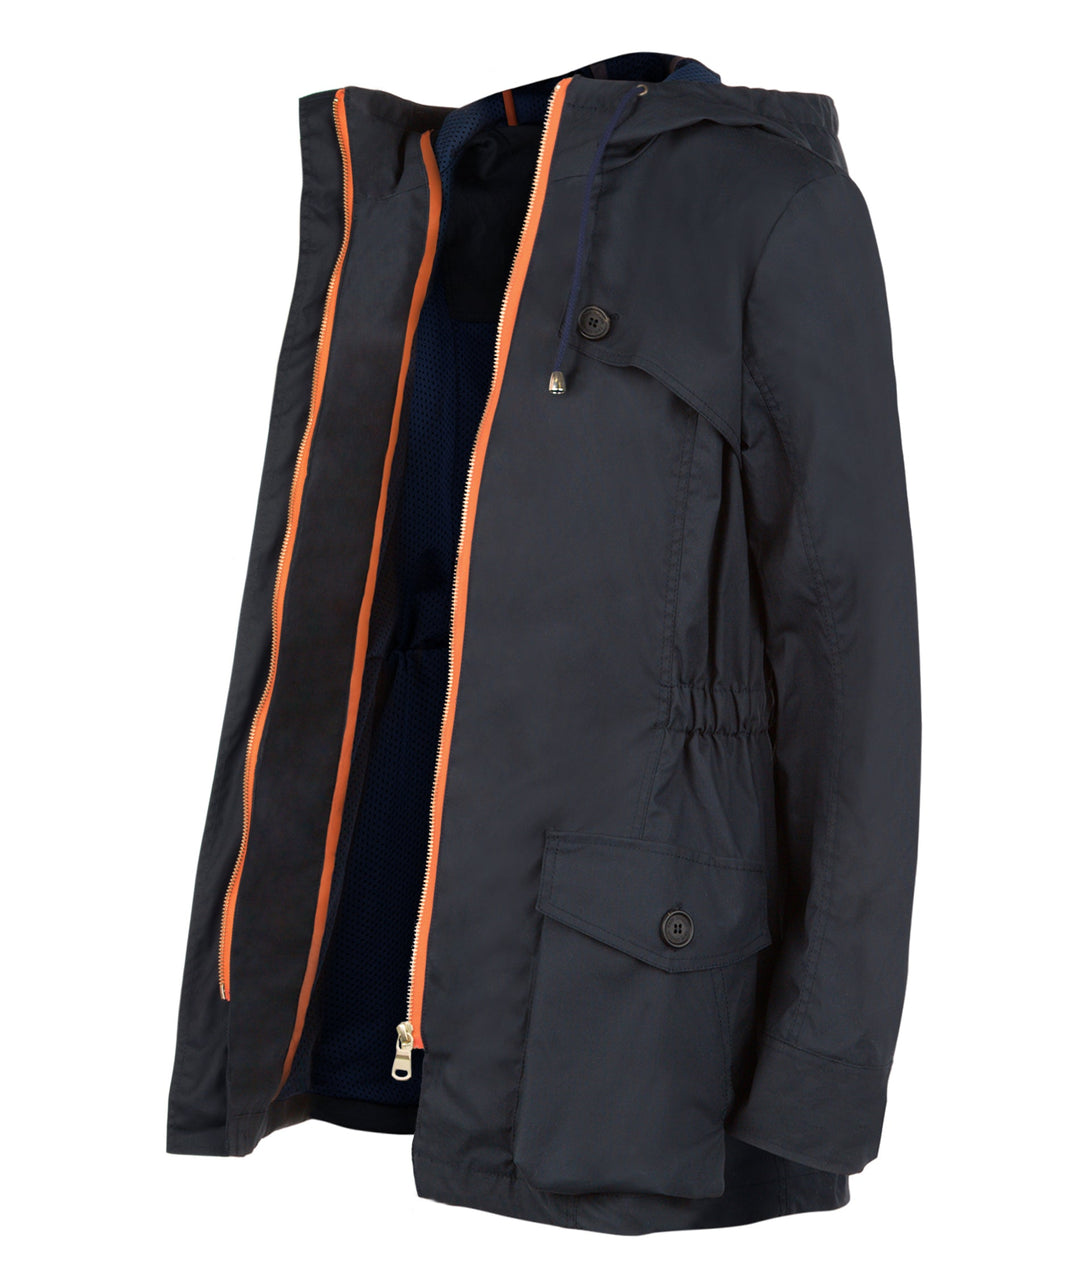 The 'pop' version of the TROY bestseller: This lightweight coat is made from 100% cotton milled in England with a dry wax finish. A black sports-luxe lining provides fully waterproof protection and brings an urban appeal to this casual but elegant coat with a cinched waist and drawstring hood. Featuring vibrant orange detailing, gold cord ends and gold engraved bar.